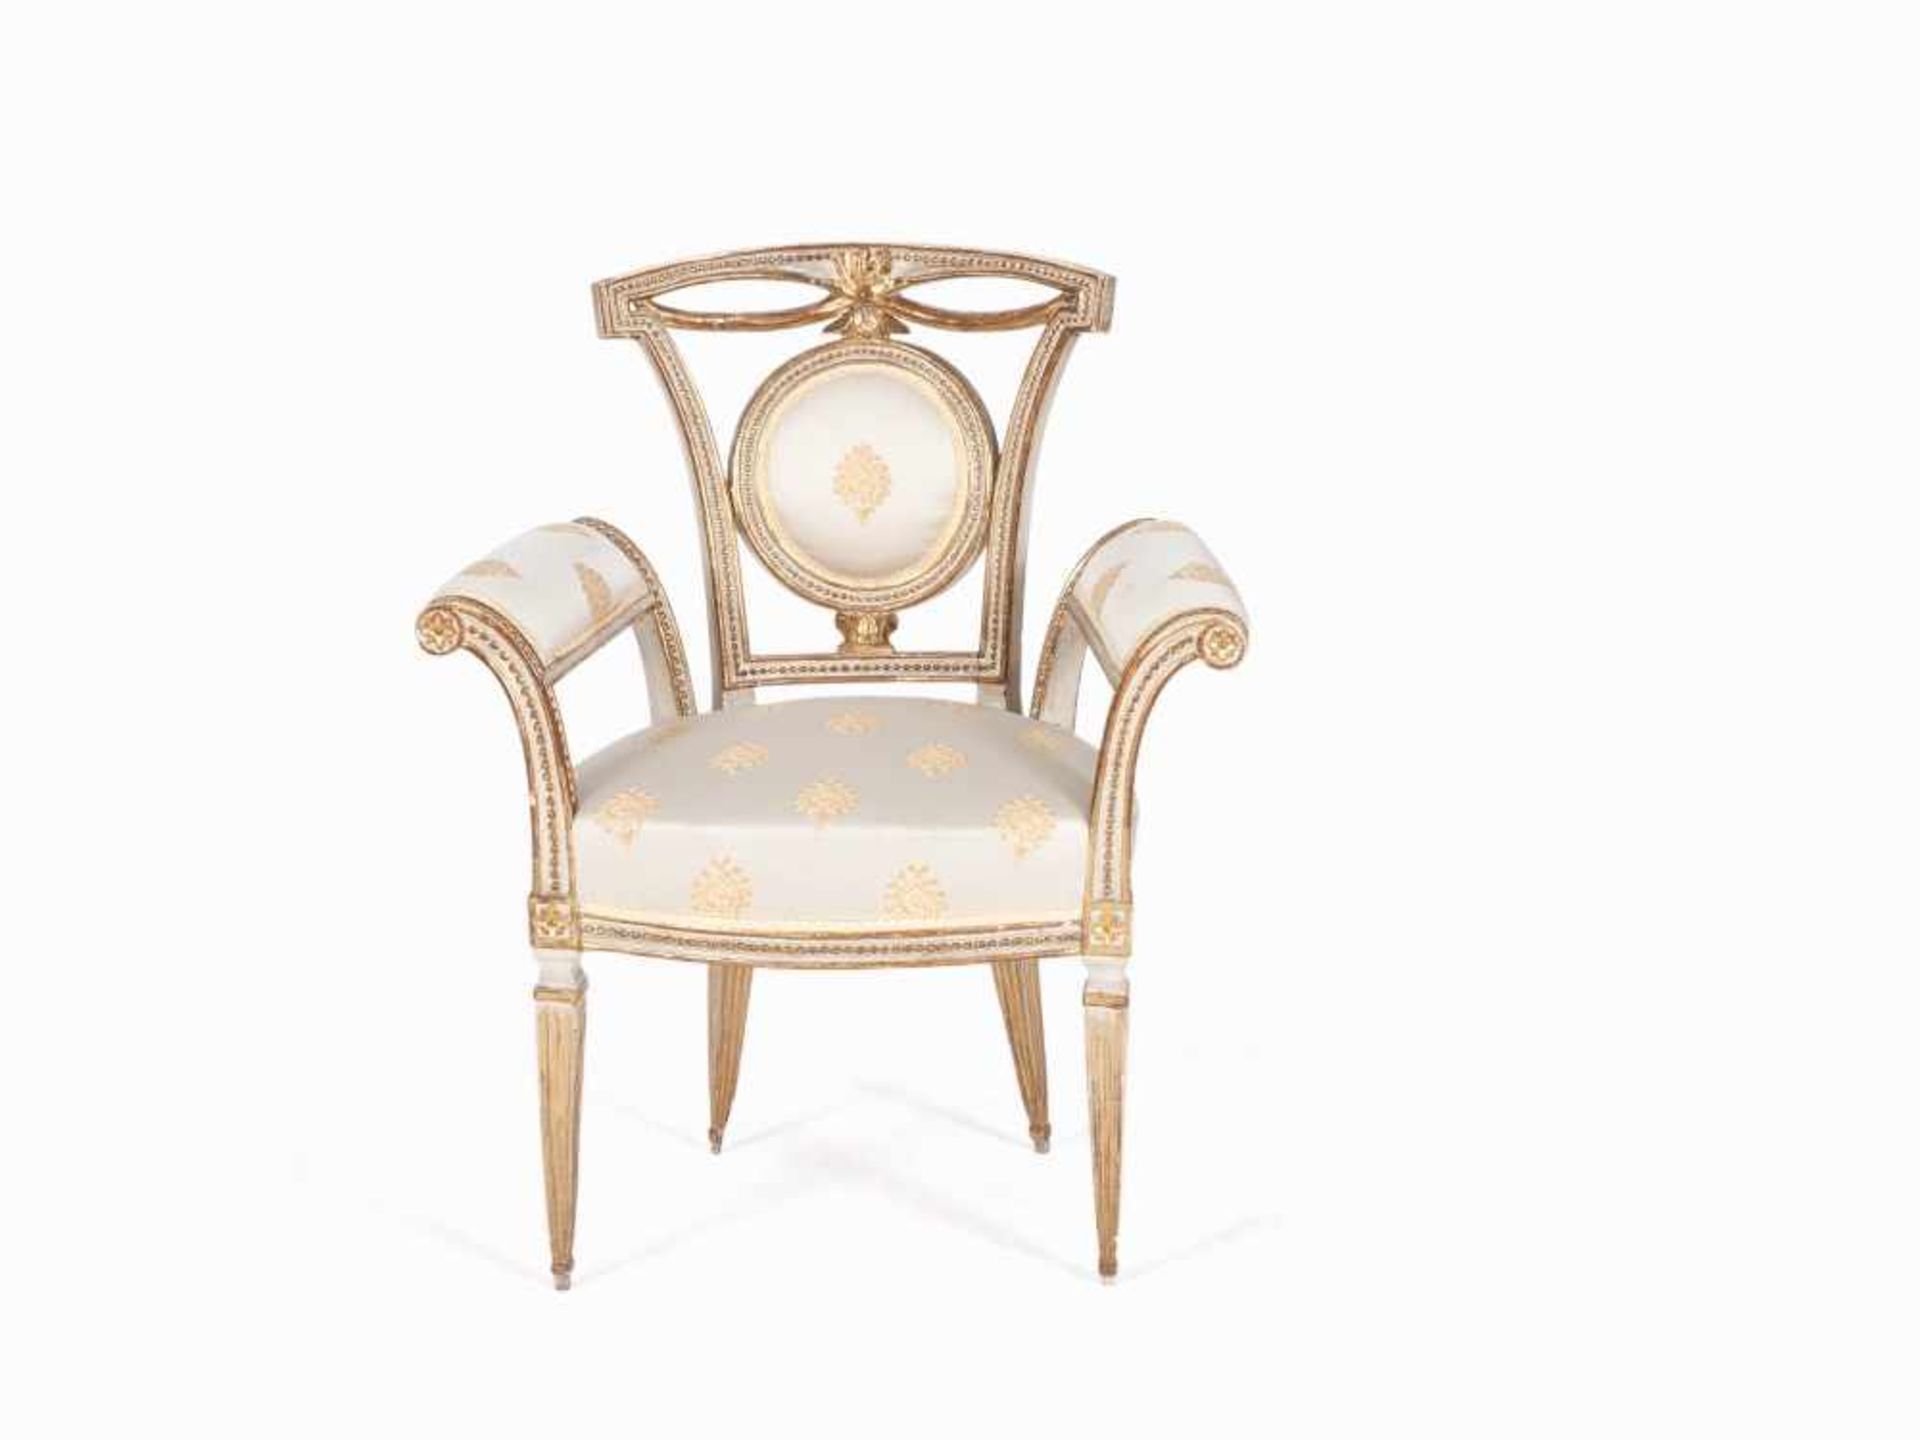 Pair of Armchairs, Lucca, around 1790 Solid wood, carved, white painted and partial gold-plated, - Image 3 of 10